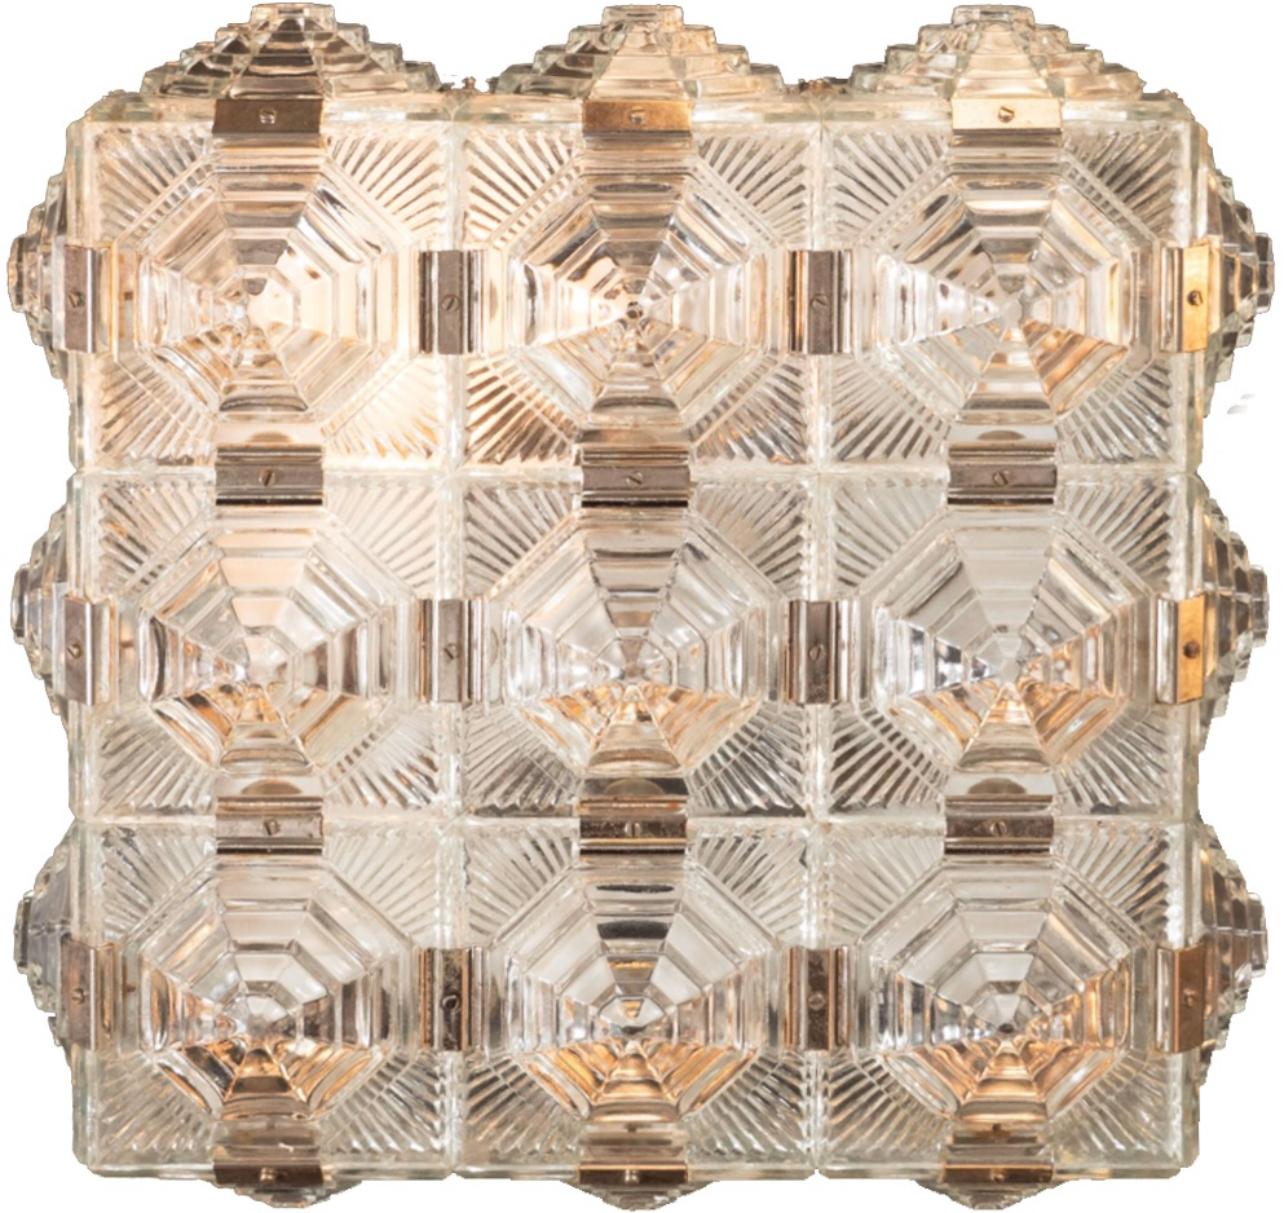 A pair of wonderful, modern 1960s glass pendants. Manufactured by Kamenicky. Czechoslovakia, 1960s. Newly rewired.

This stunning pair of sculptural translucent light fixtures by Kamenicky feature an intricate pressed glass stylized geometric